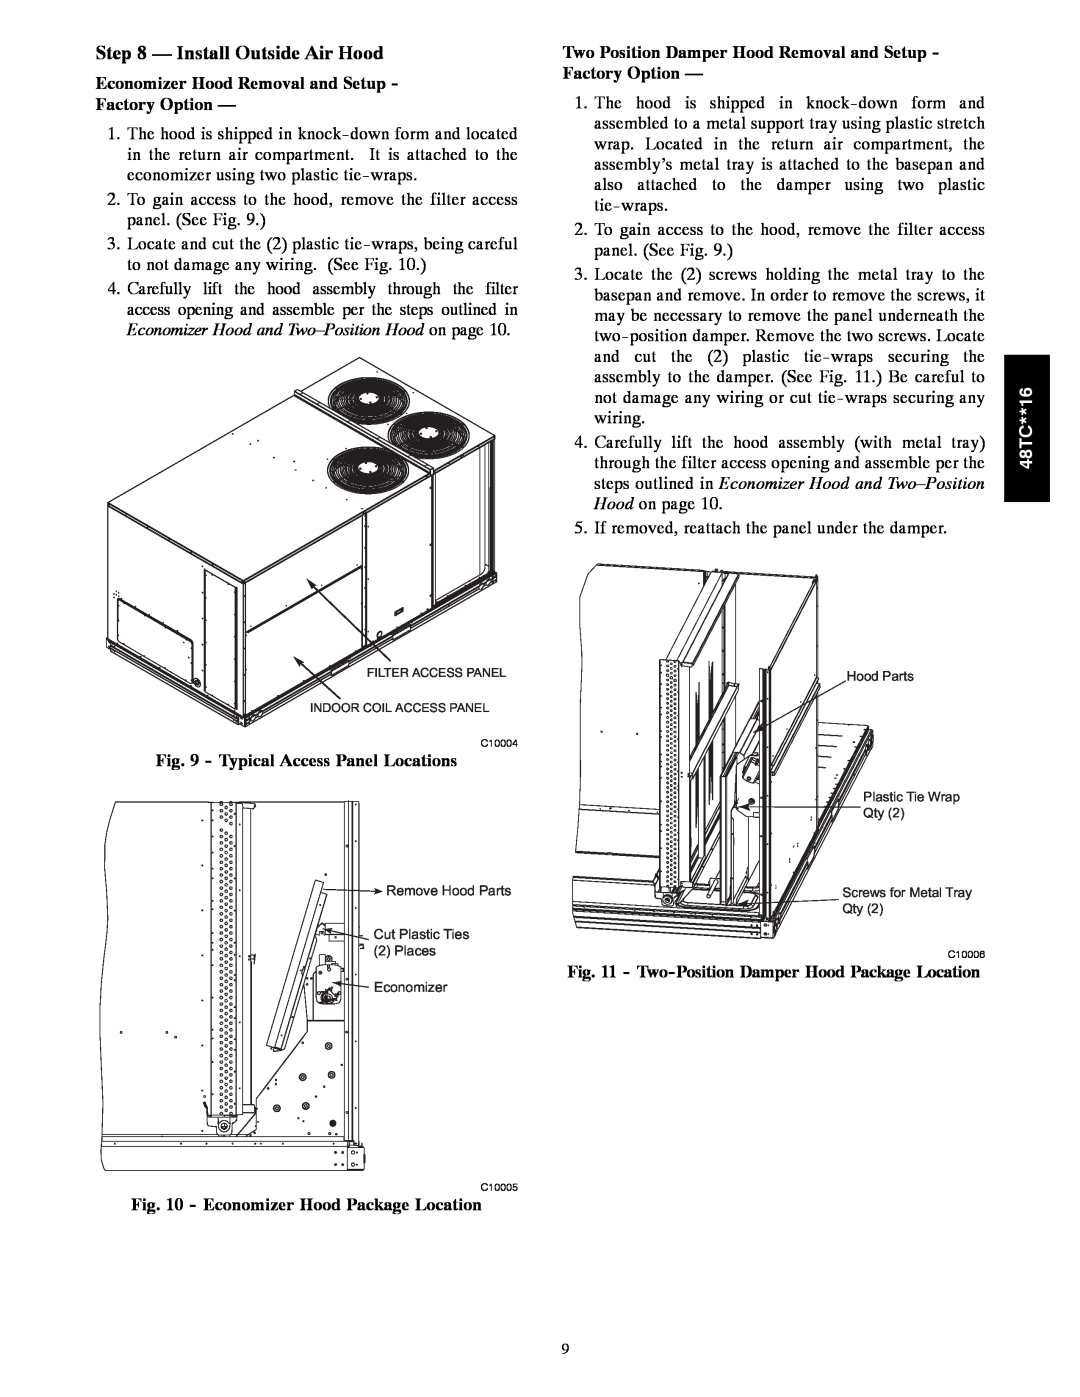 Carrier 48TC**16 installation instructions Install Outside Air Hood, Economizer Hood Removal and Setup, Factory Option 